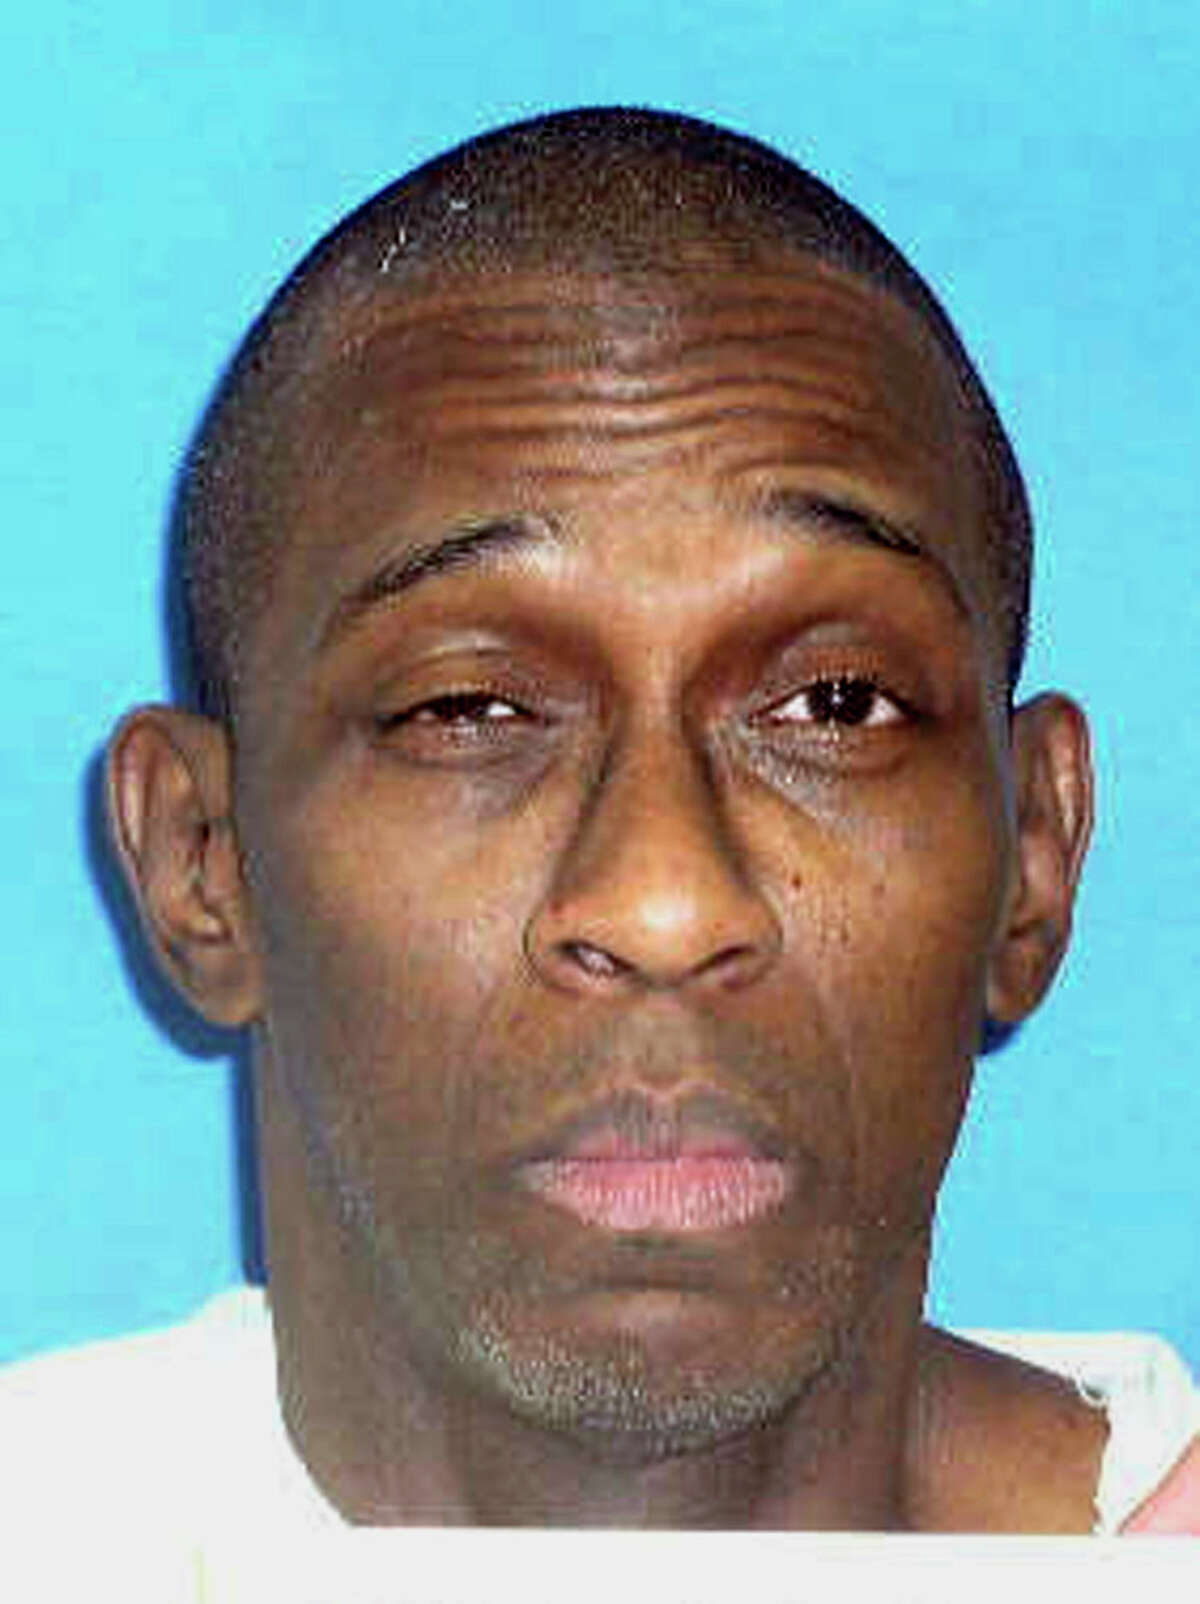 This photo released by the Texas Department of Criminal Justice shows death row inmate Gerald Cornelius Eldridge who is scheduled for execution by lethal injection at the Texas prison in Huntsville, Tuesday, Nov. 16, 2009. Eldridge was convicted of capital murder charges for a shooting spree that wounded his son and left his daughter and their mother dead. (AP Photo/Texas Department of Criminal Justice) Gerald Eldridge